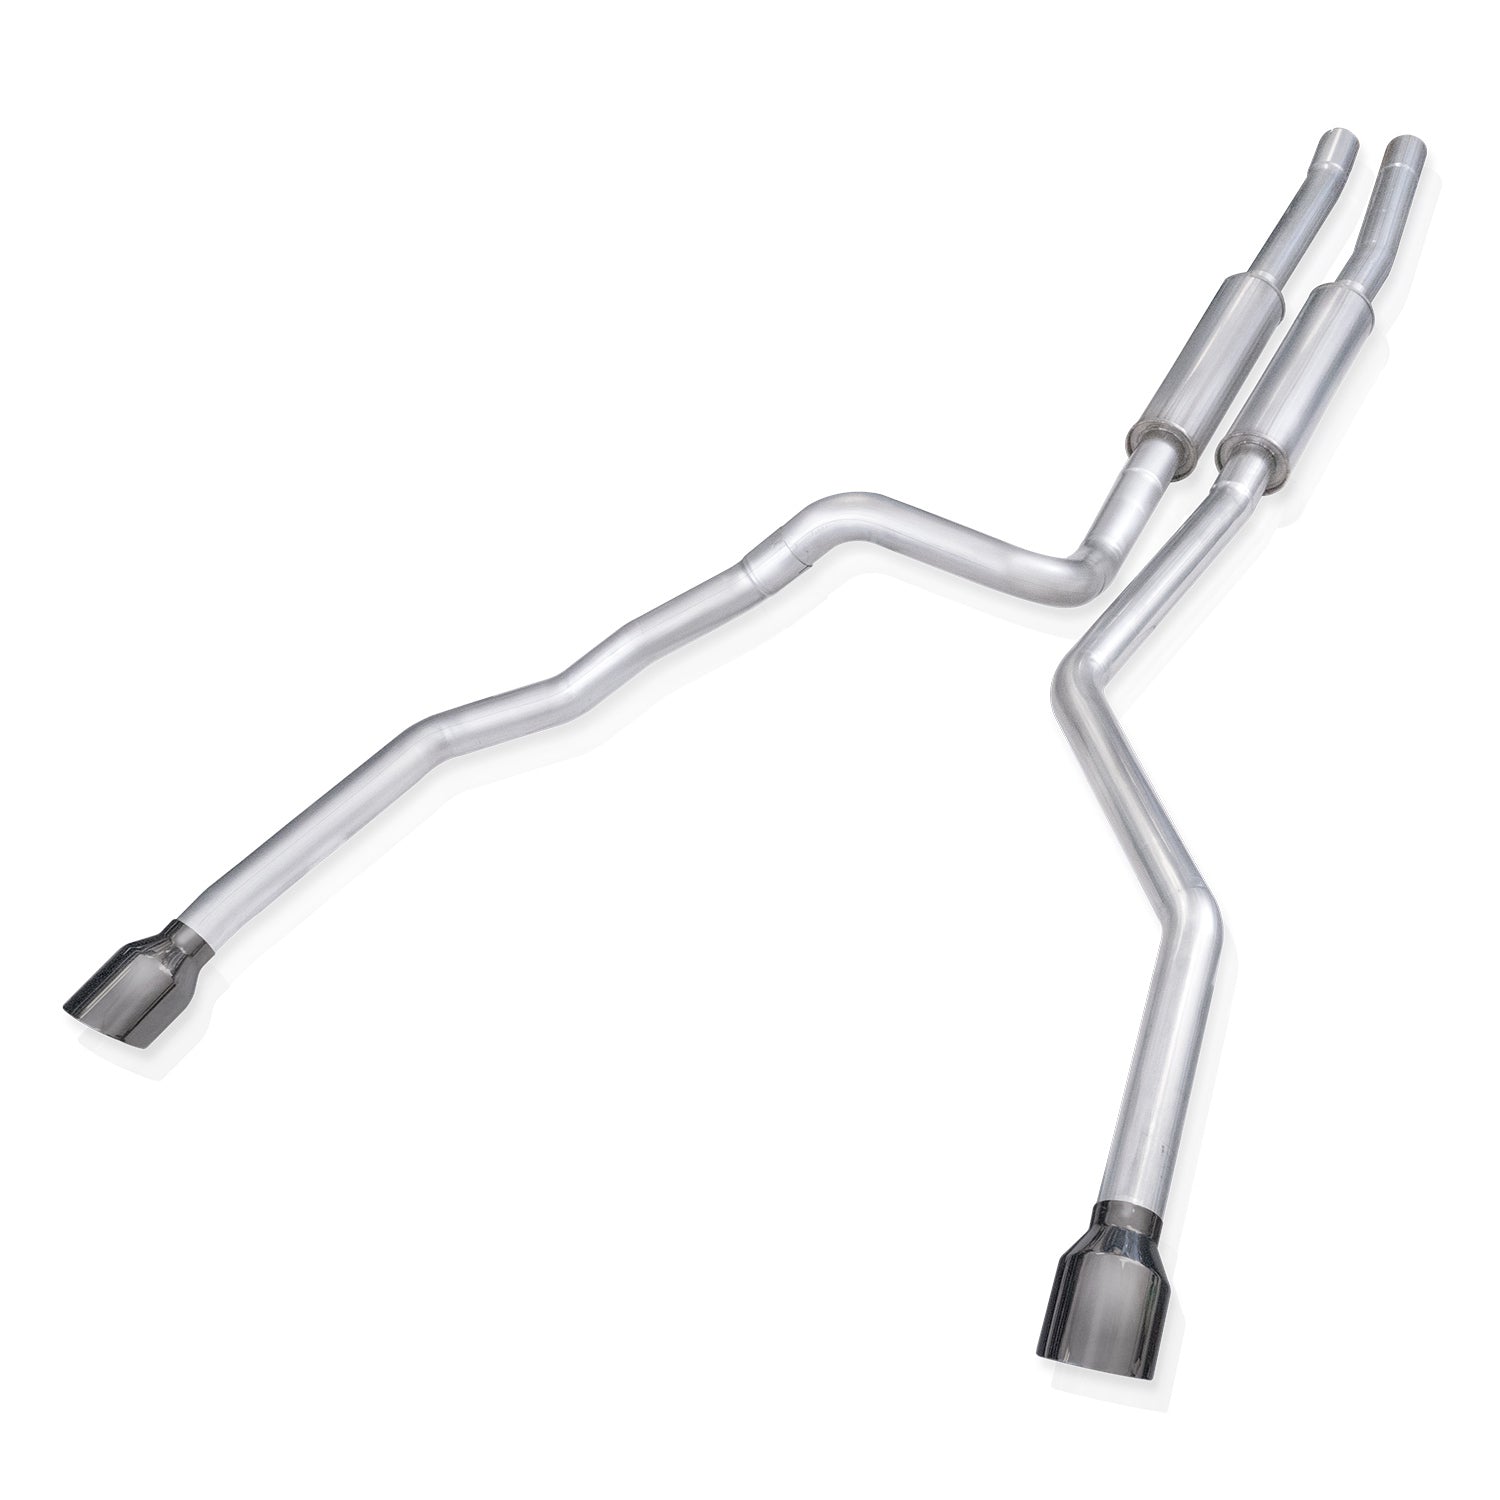 '21-23 Ram TRX 6.2L Catback Exhaust System Stainless Works individual display